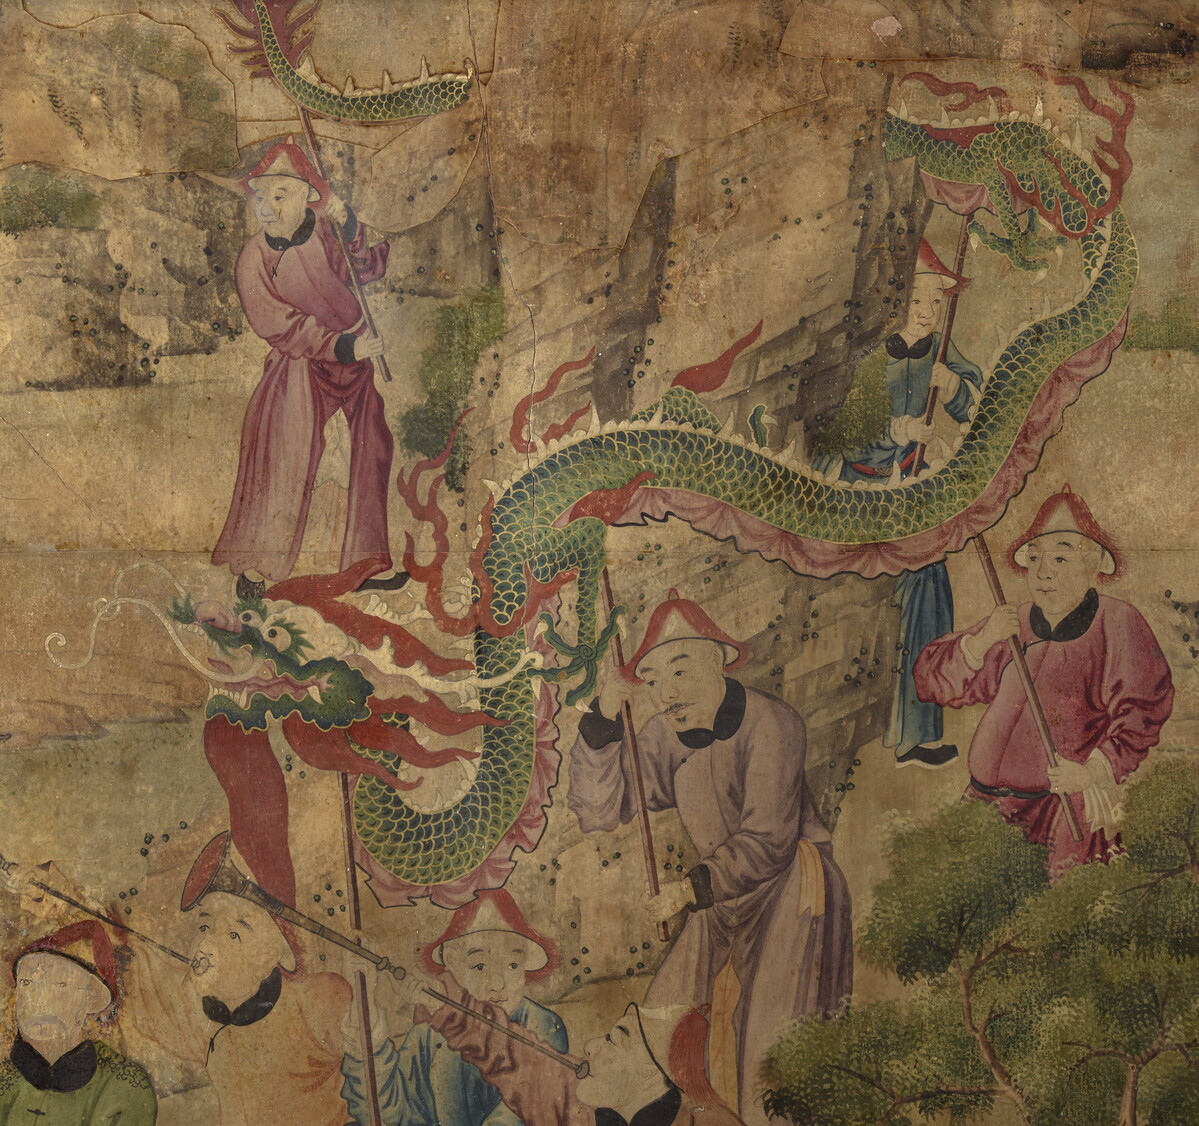 Detail of wallpaper showing Chinese people carrying a dragon